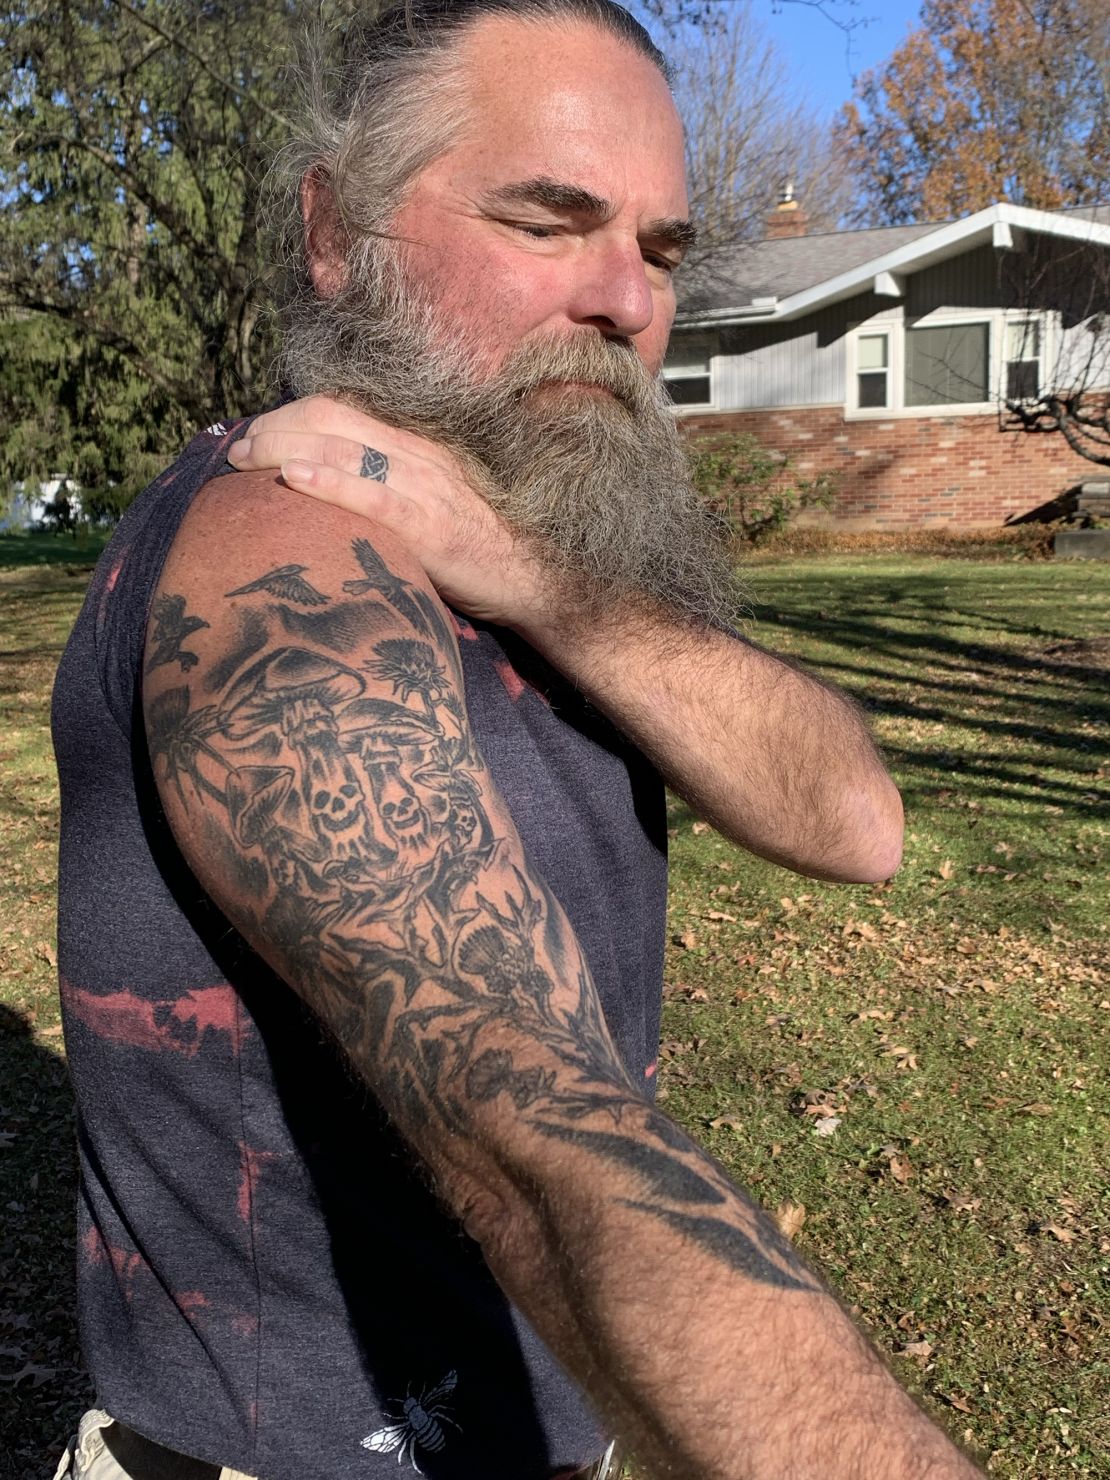 William D. Hickman's tattoo starts where doctors injected him with an antidote and ends of the mushrooms he ate and the milk thistle plant that saved him.